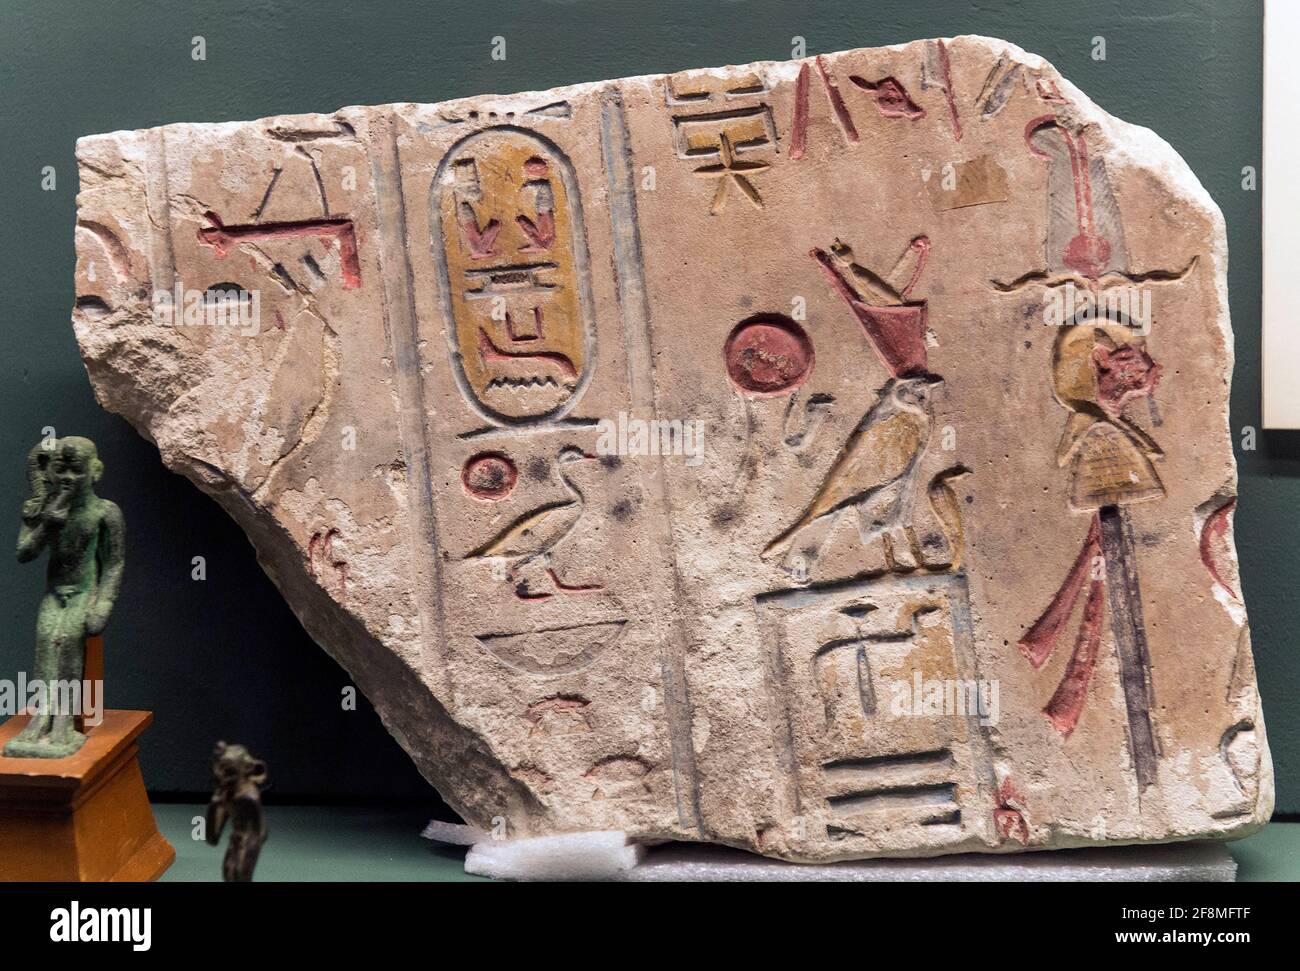 San Jose, California, USA. 14th Apr, 2021. A Fragment from the Temple of Takelot III is seen on display at the Rosicrucian Egyptian Museum. Established in 1928 as The Rosicrucian Egyptian Oriental Museum, the Museum - owned by the Rosicrucian Order, a philosophical and educational 501c3 public benefit organization - now houses more than 4,000 artifacts. It is the largest display of Egyptian artifacts in western North America. Credit: Brian Cahn/ZUMA Wire/Alamy Live News Stock Photo